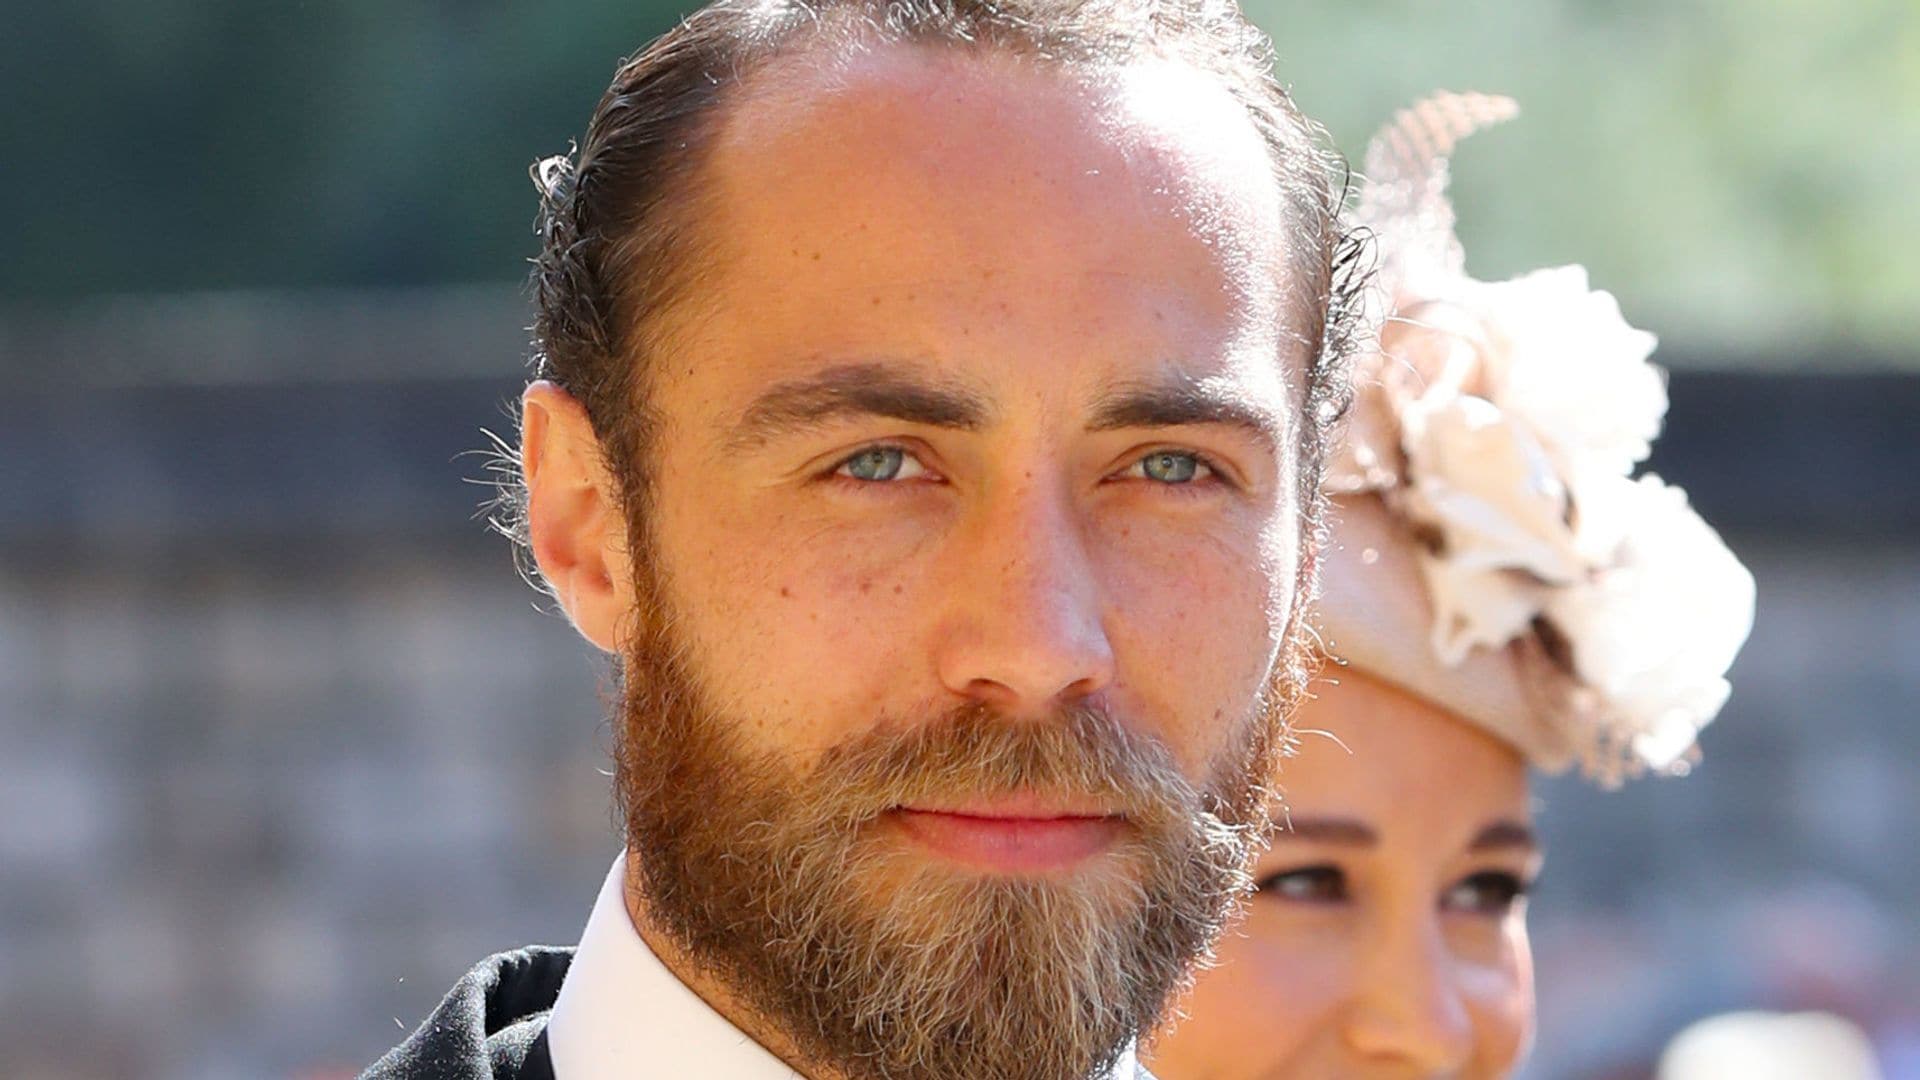 The Princess of Wales' brother remembers loved one with touching post on Instagram